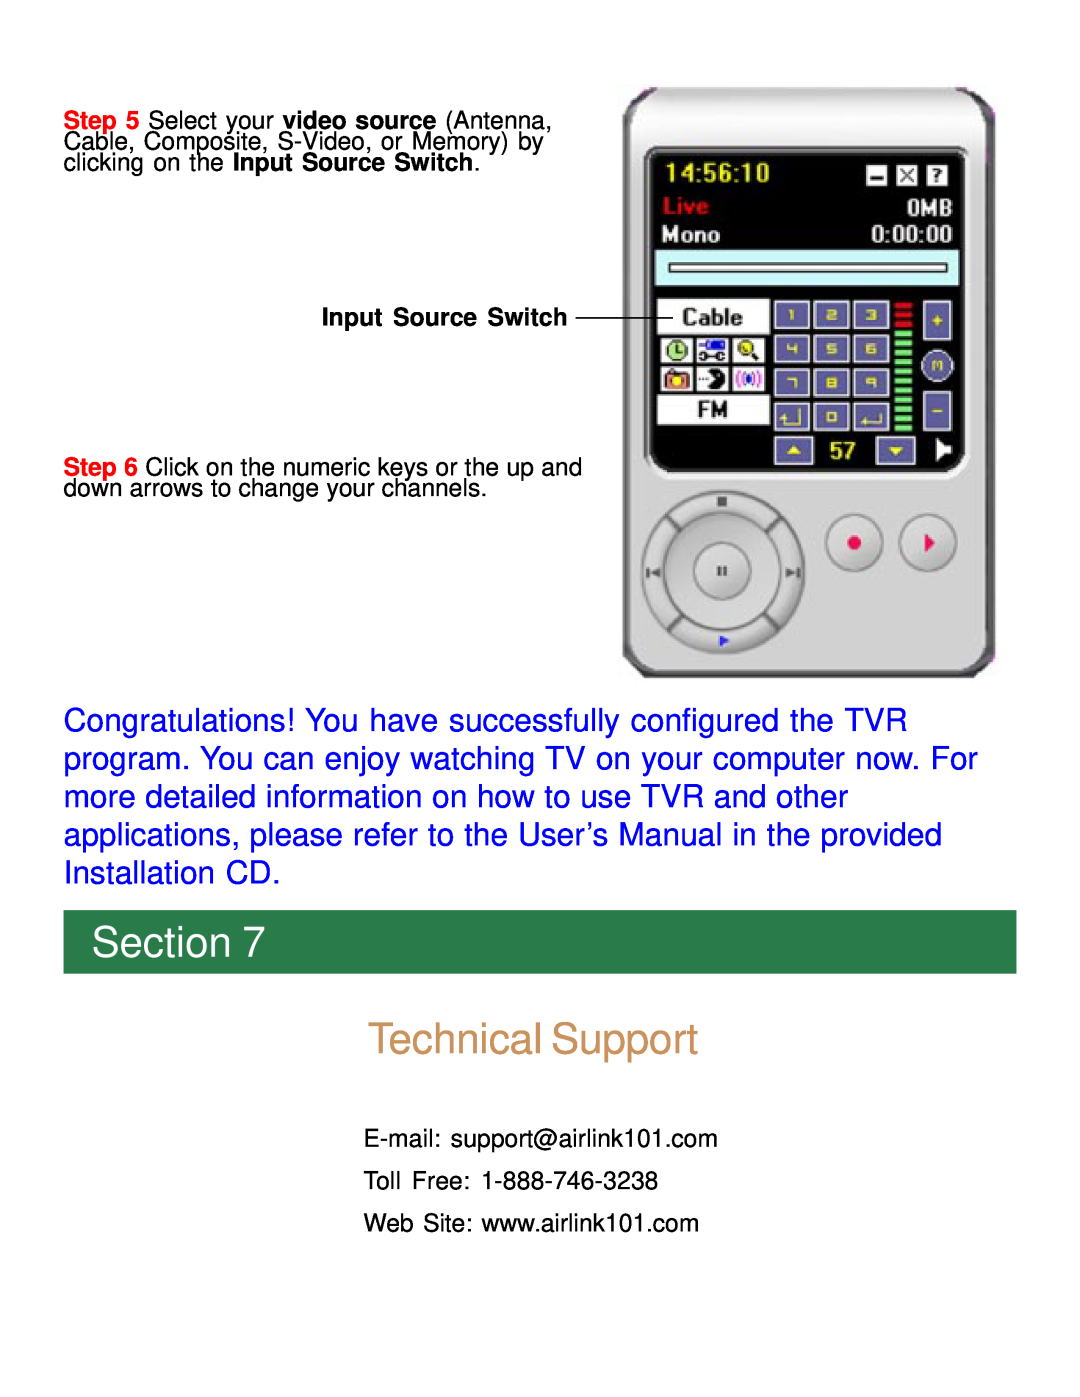 Airlink101 ATVUSB05 manual Technical Support, Section, Input Source Switch 